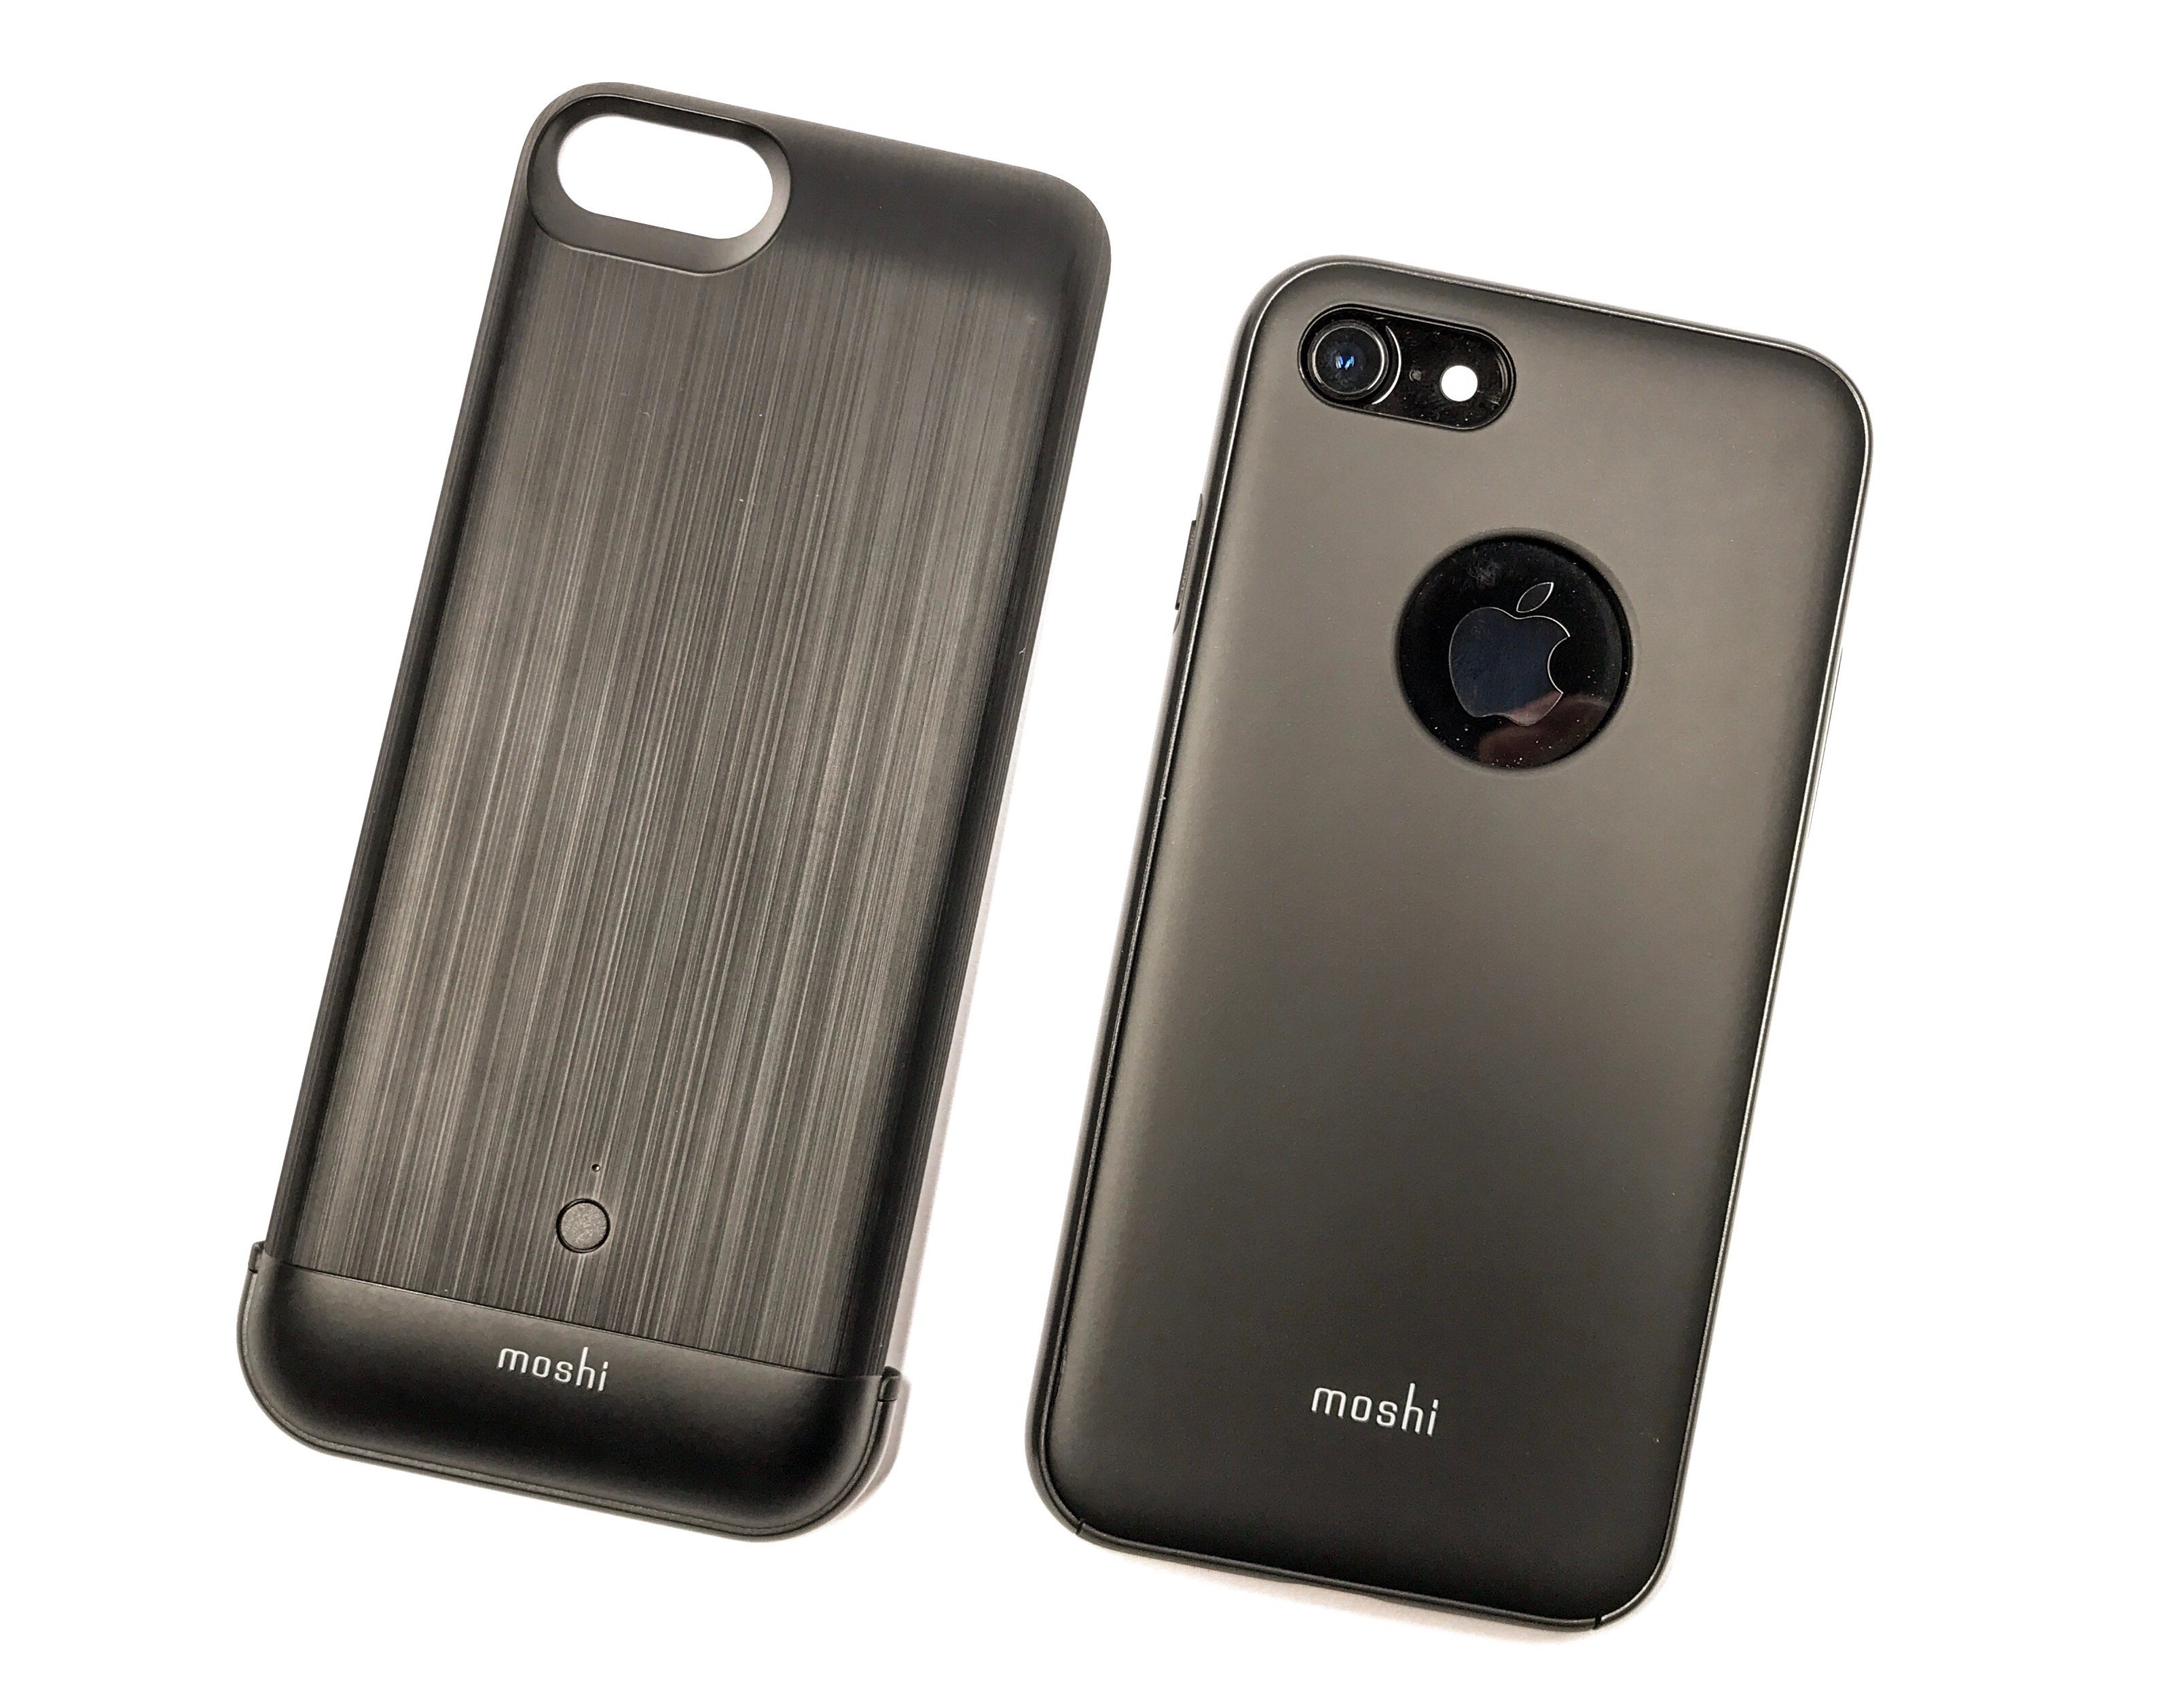 The Moshi IonSuit solves one of the biggest problems with battery cases.